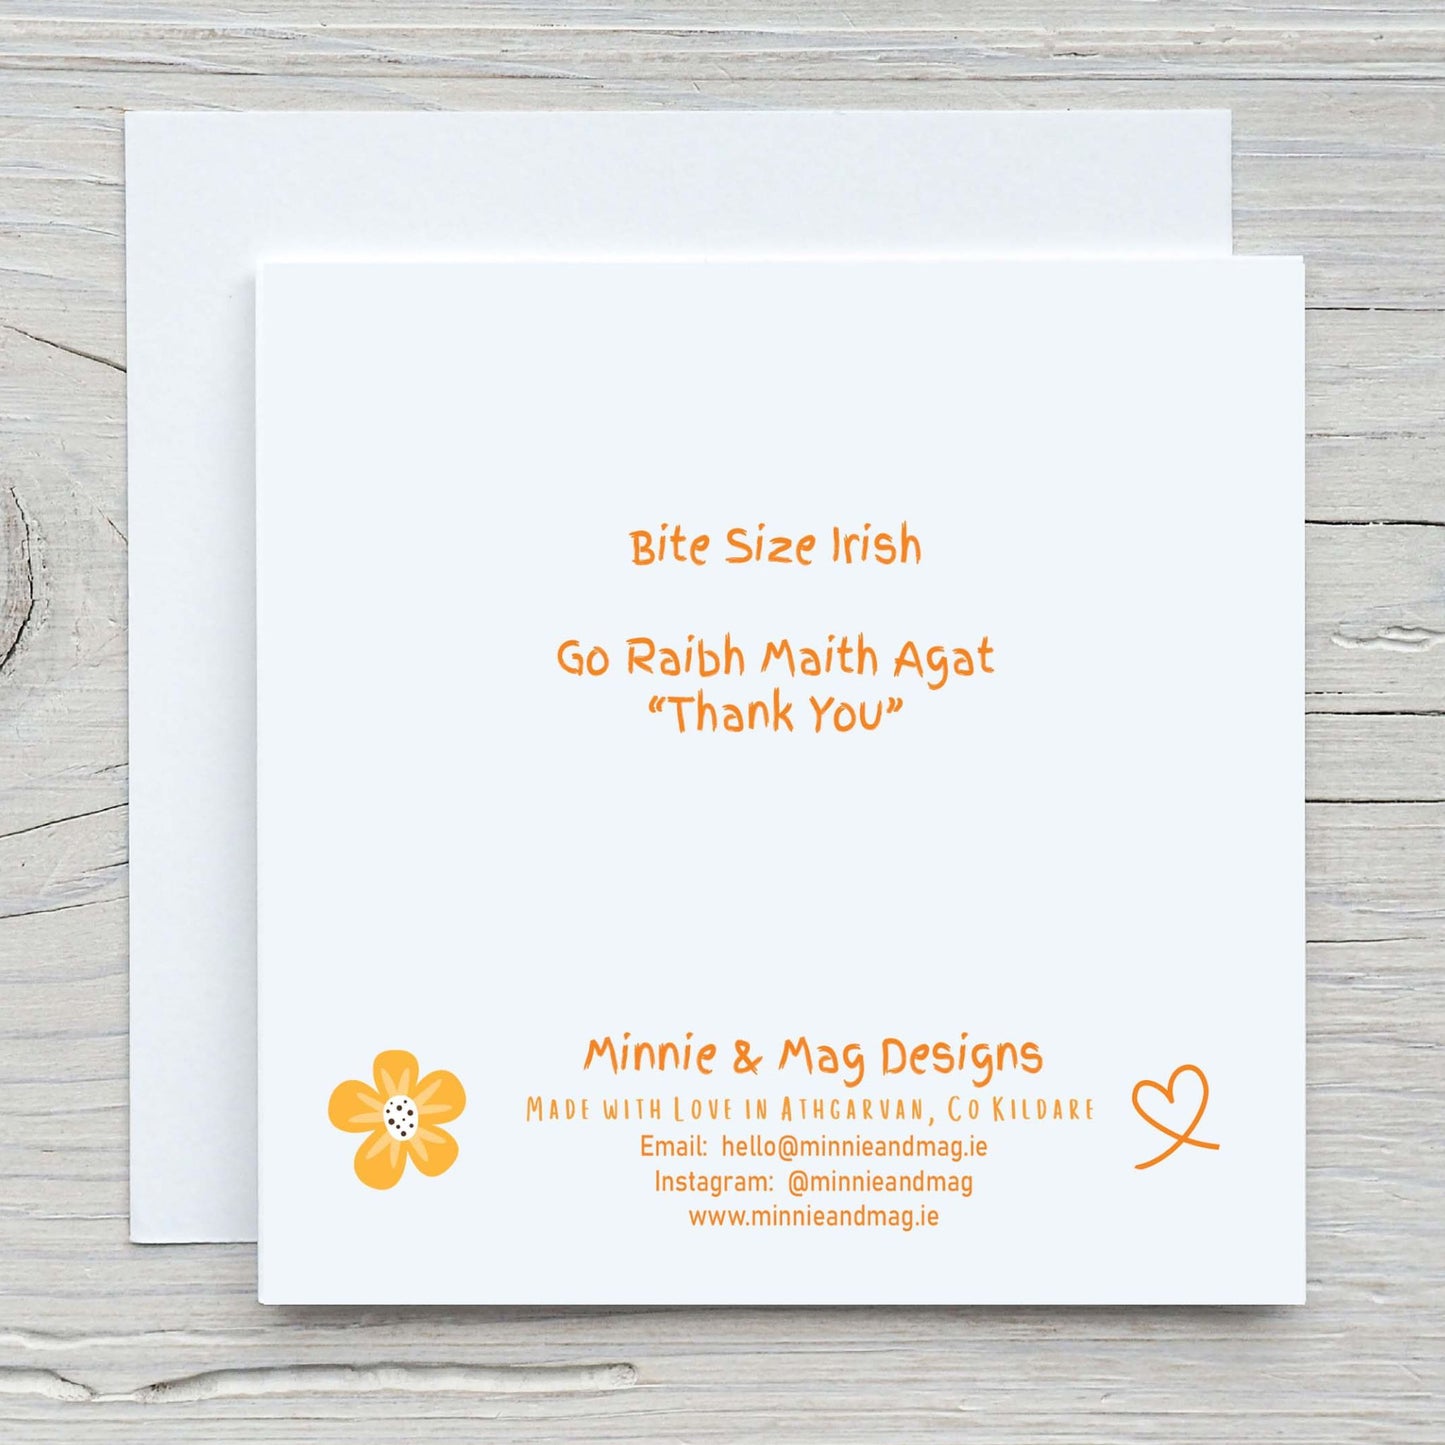 Back of greeting card shows bite size Irish translation of Go Raibh Maith Agat to Thank You. Comes with white envelope.